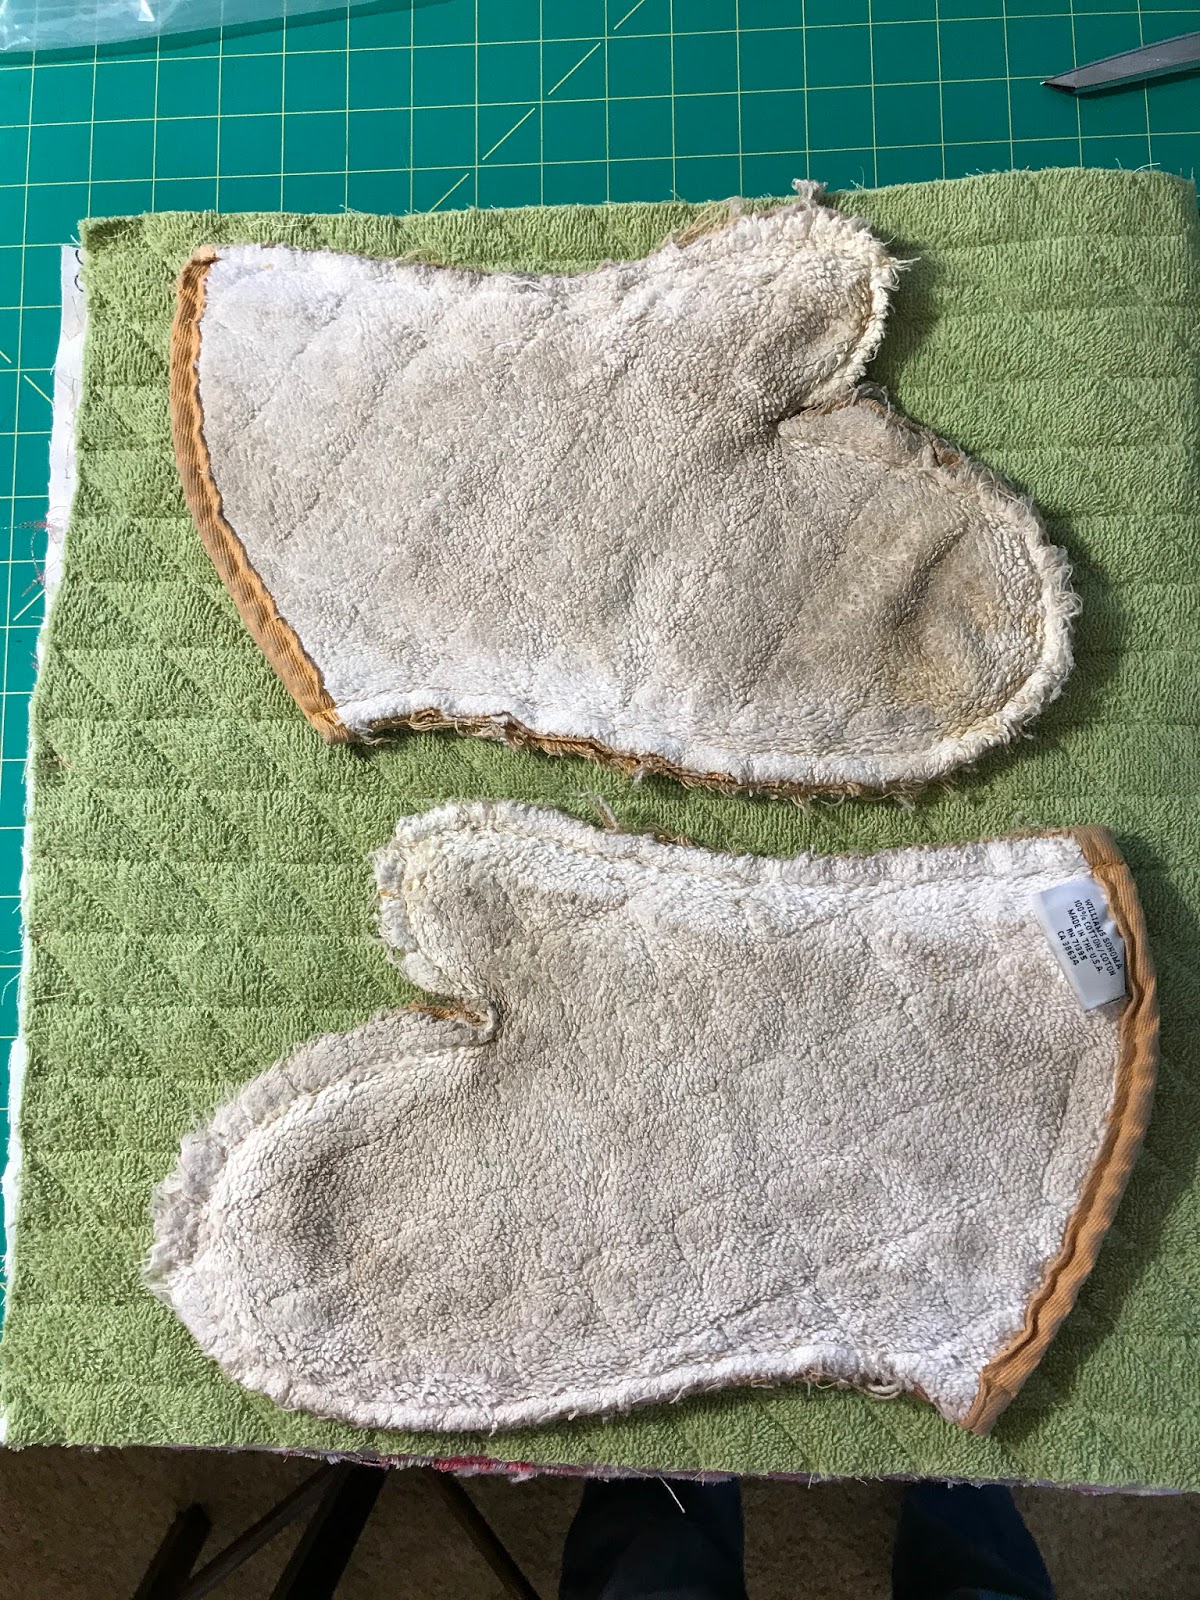 Rebecca Grace Quilting: In Which My Husband Sets My Oven Mitts On